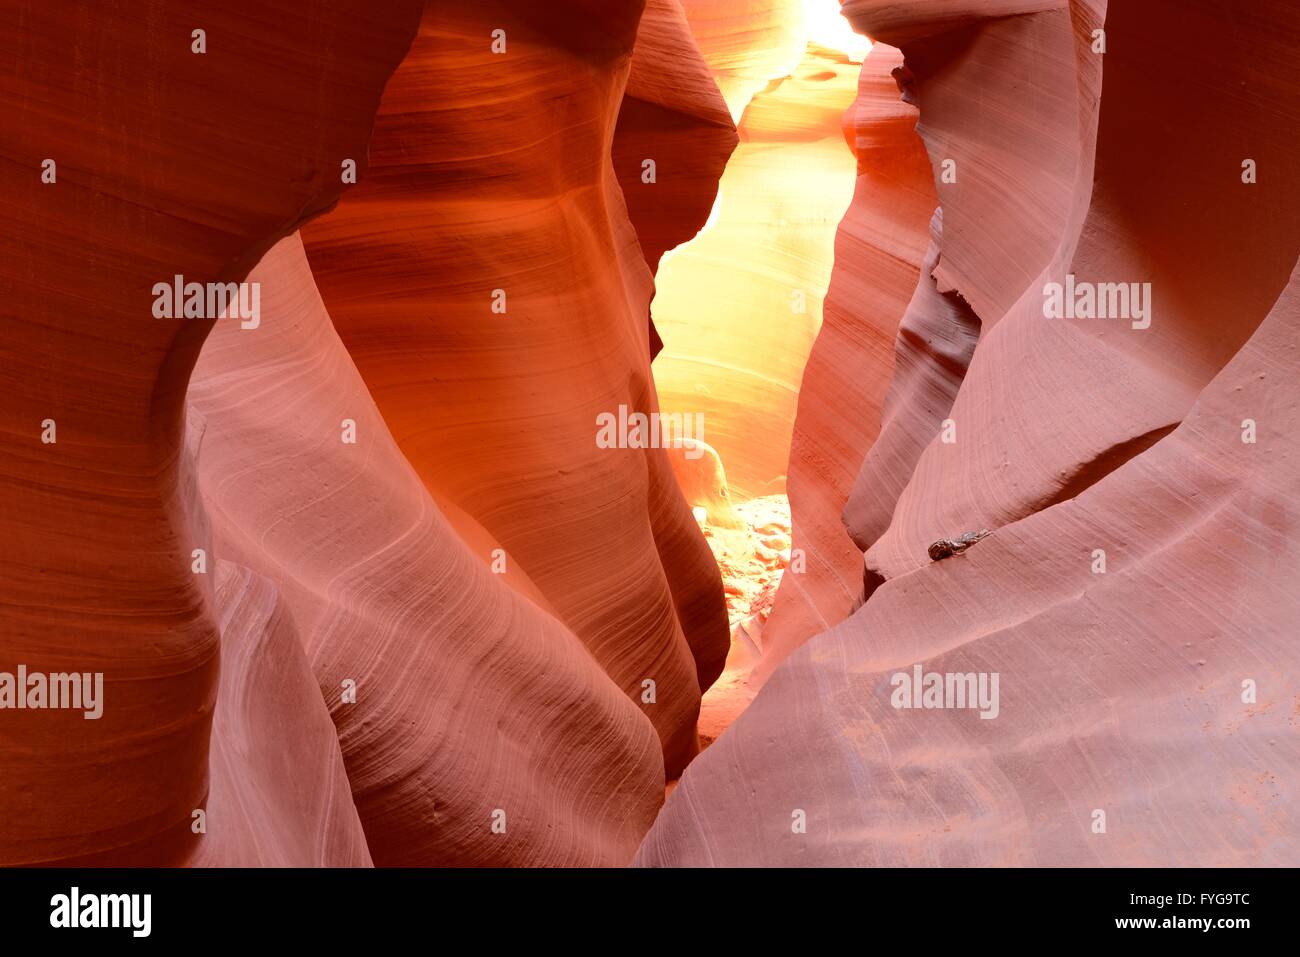 Red Rocks - The midday sun lights up the colorful sandstone rocks in a high desert slot canyon. Stock Photo